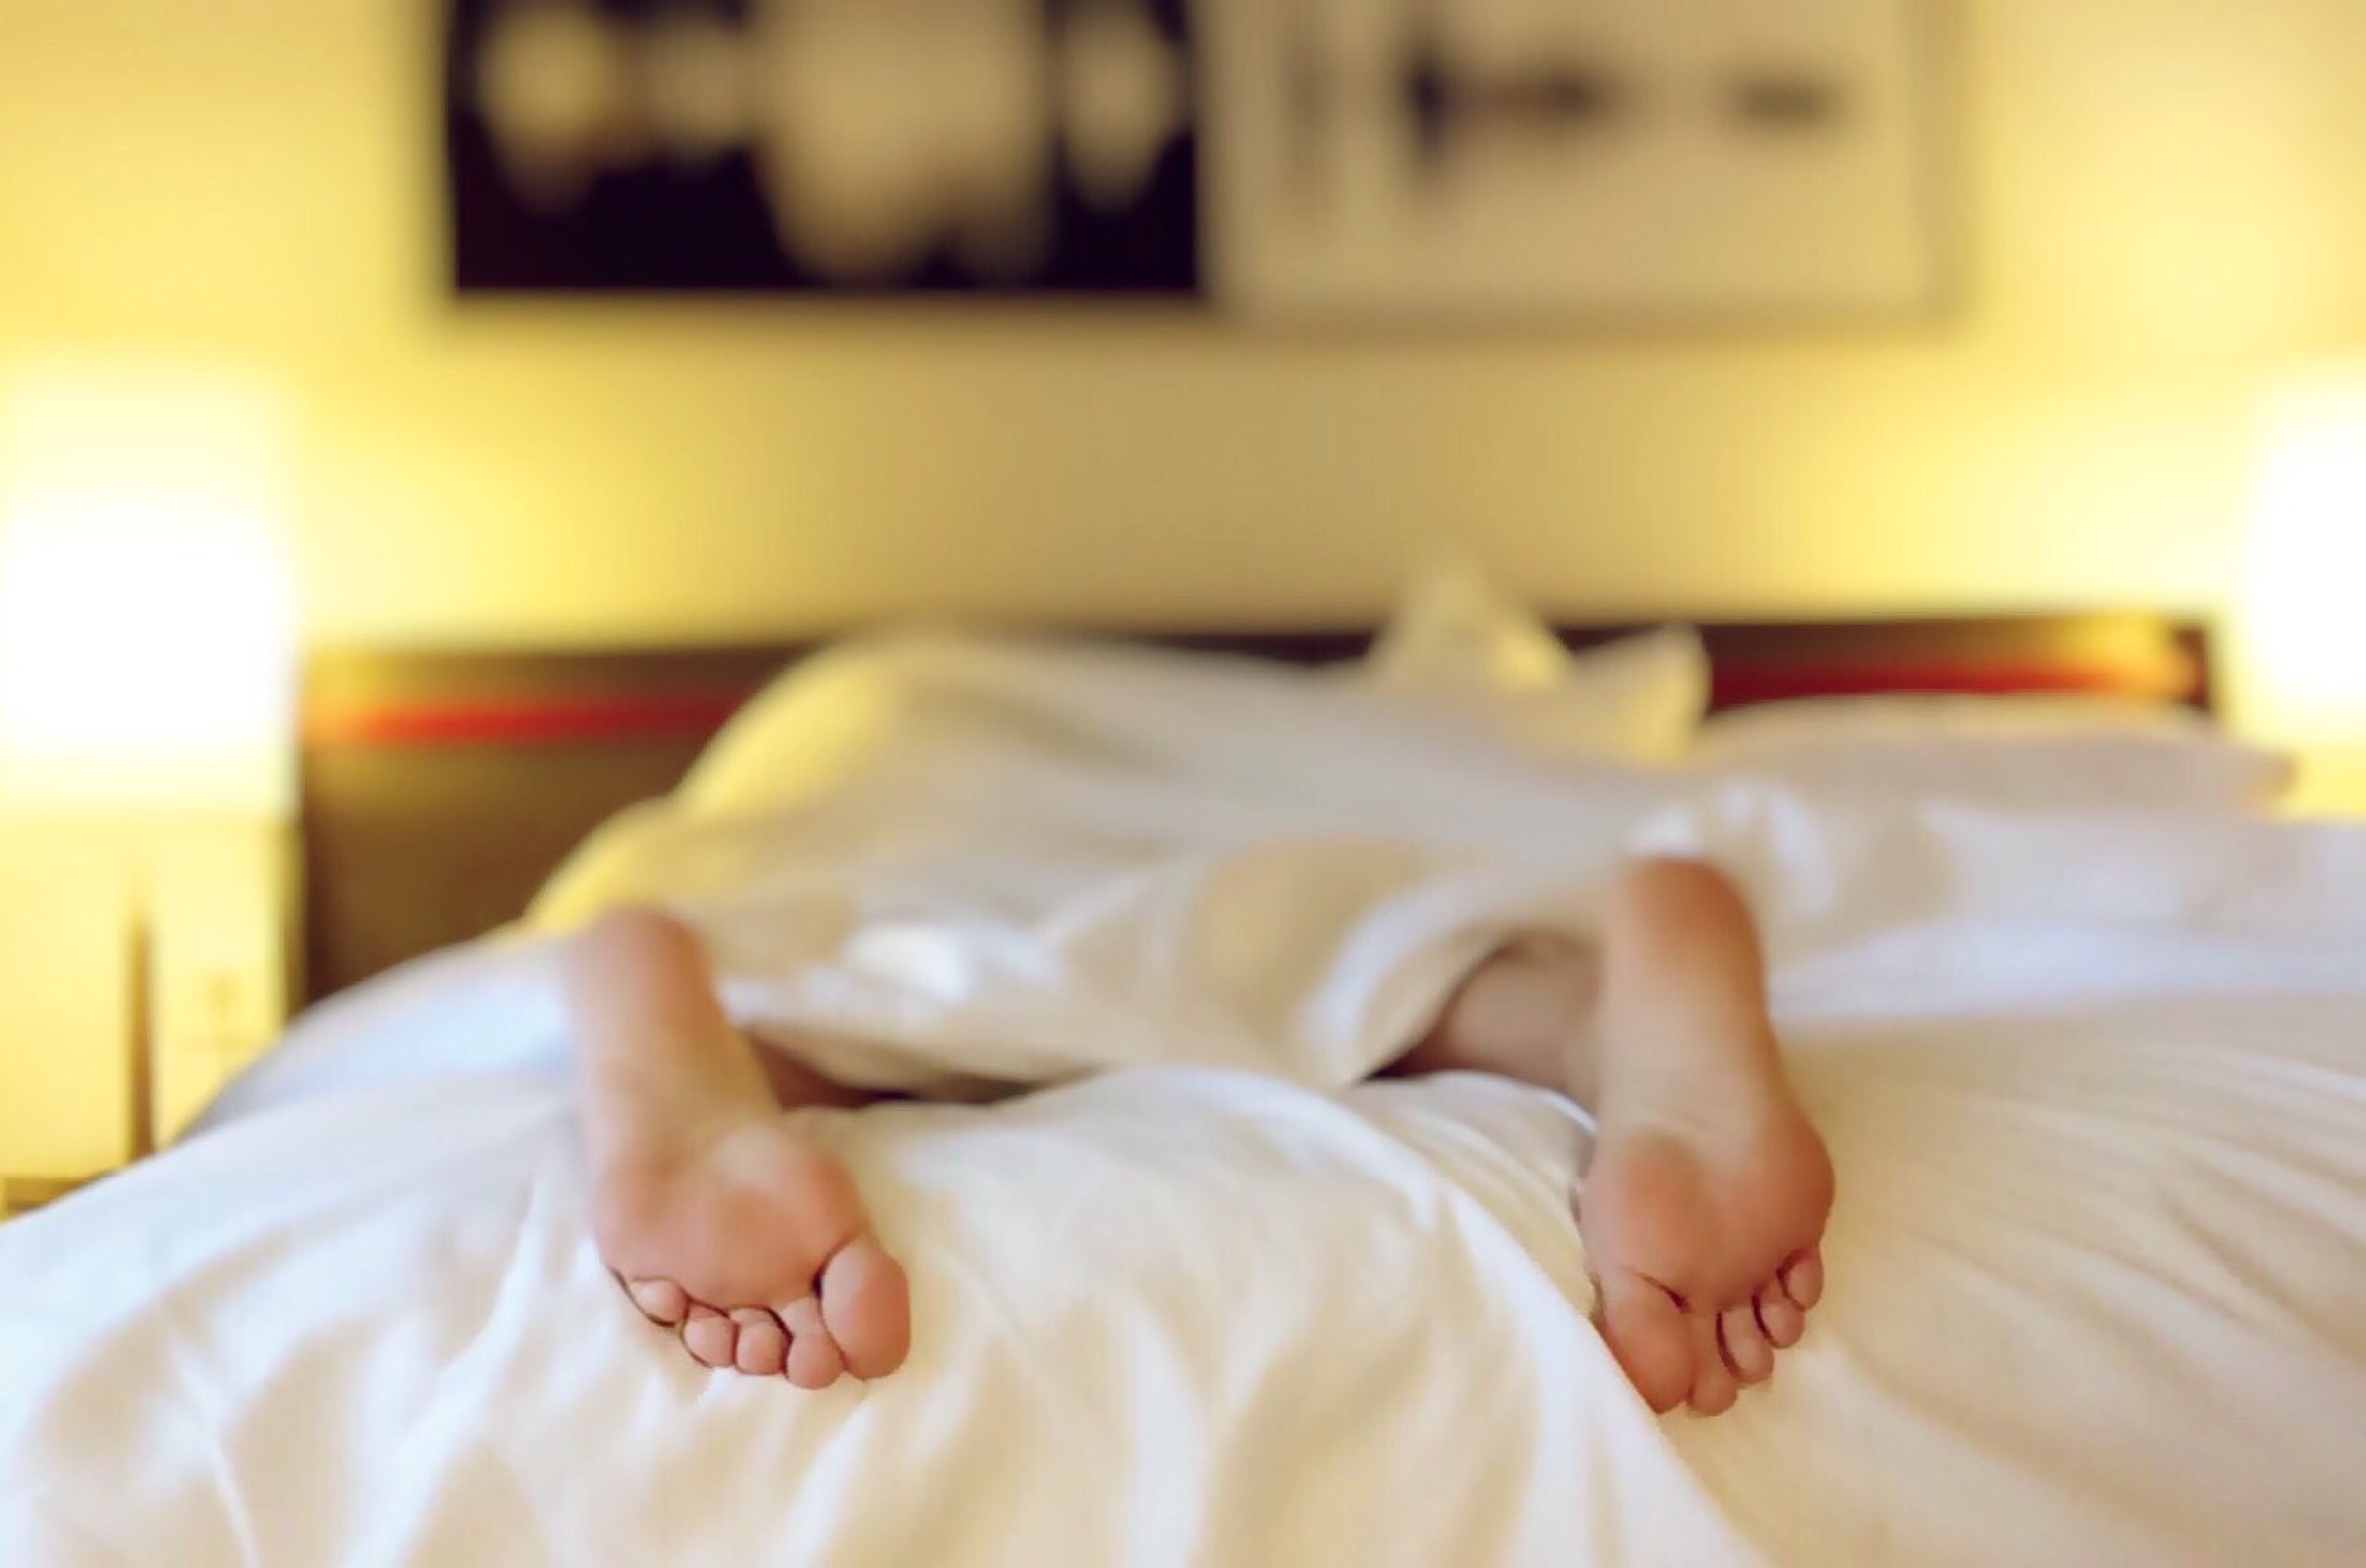 Feet poking out of white bed sheets